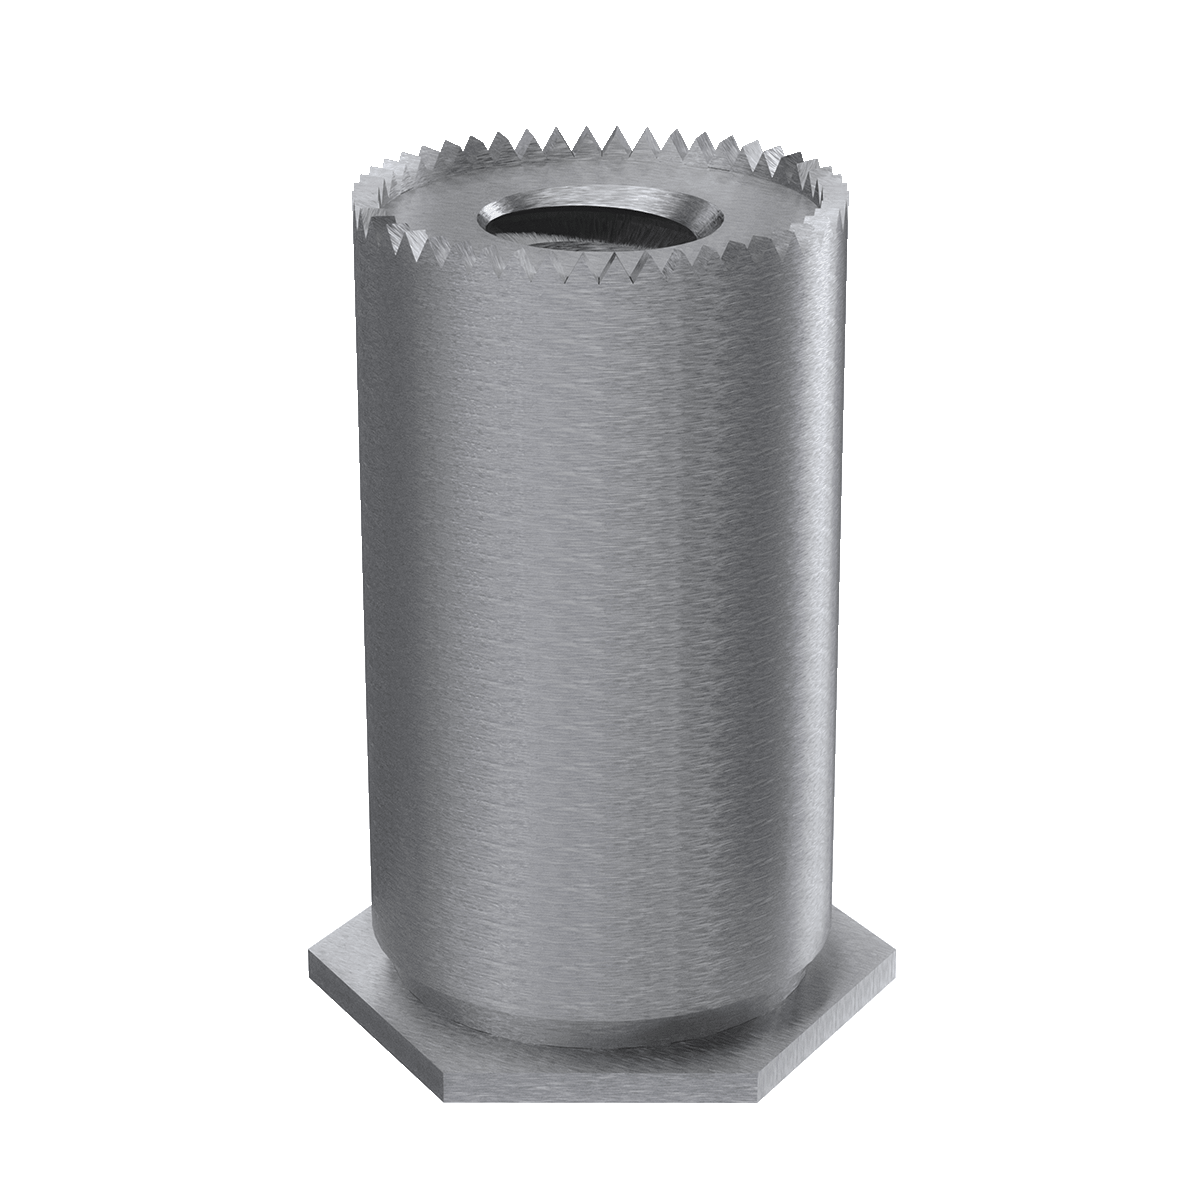 Self-Clinching Standoff, Self-Grounding, 300 Series Stainless Steel, Passivated, M3x0.5 x 3, 100 Pack